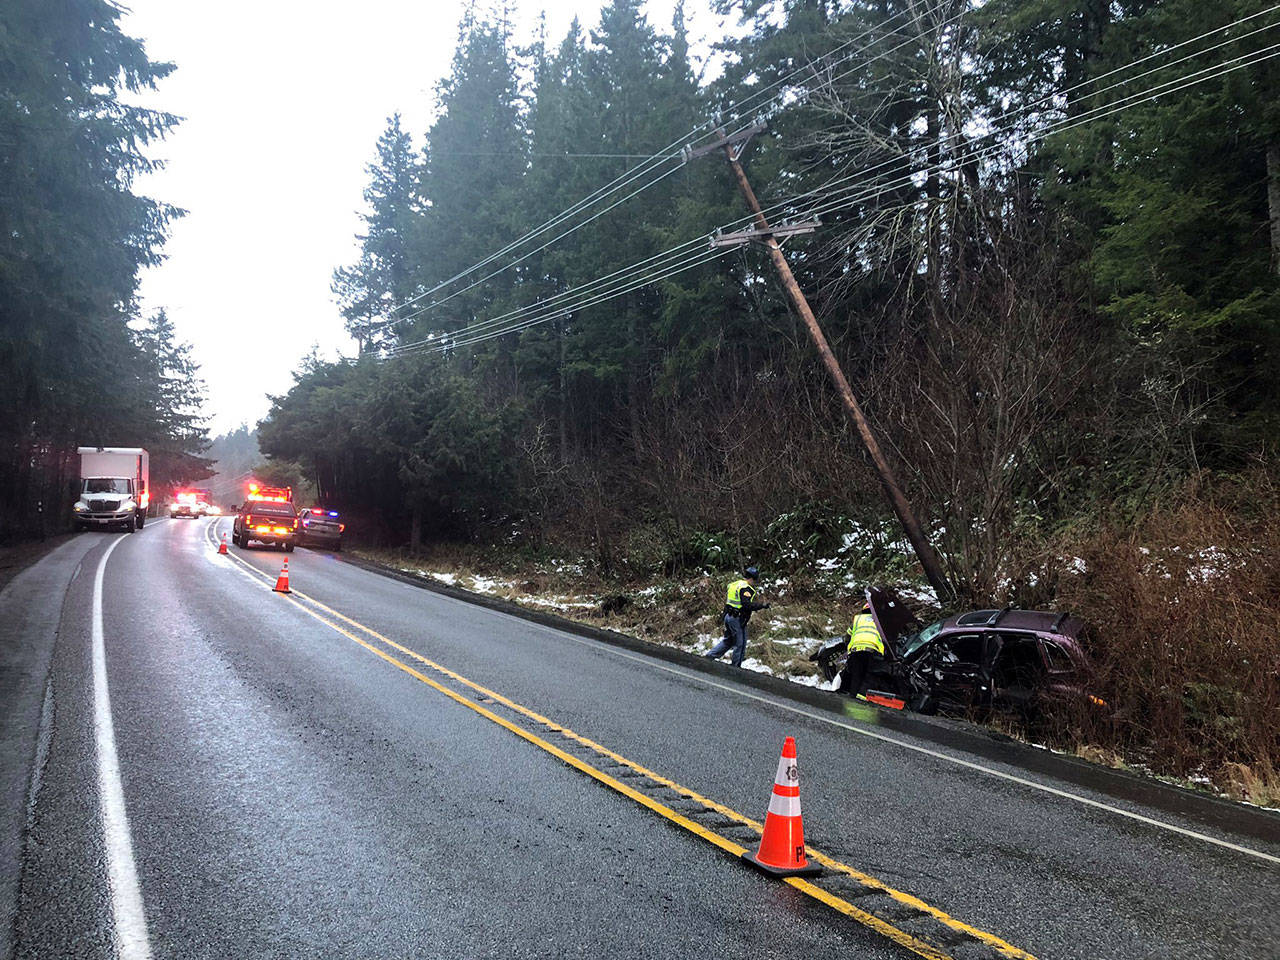 A driver collided with a utility pole Friday afternoon on state Highway 19 near Larson Lake Road. The Jefferson County Sheriff’s Office reported the road would be shut down completely until 10 p.m., and then reopened with alternating one-way traffic until 8 a.m. Saturday. (Jefferson County Sheriff’s Office)